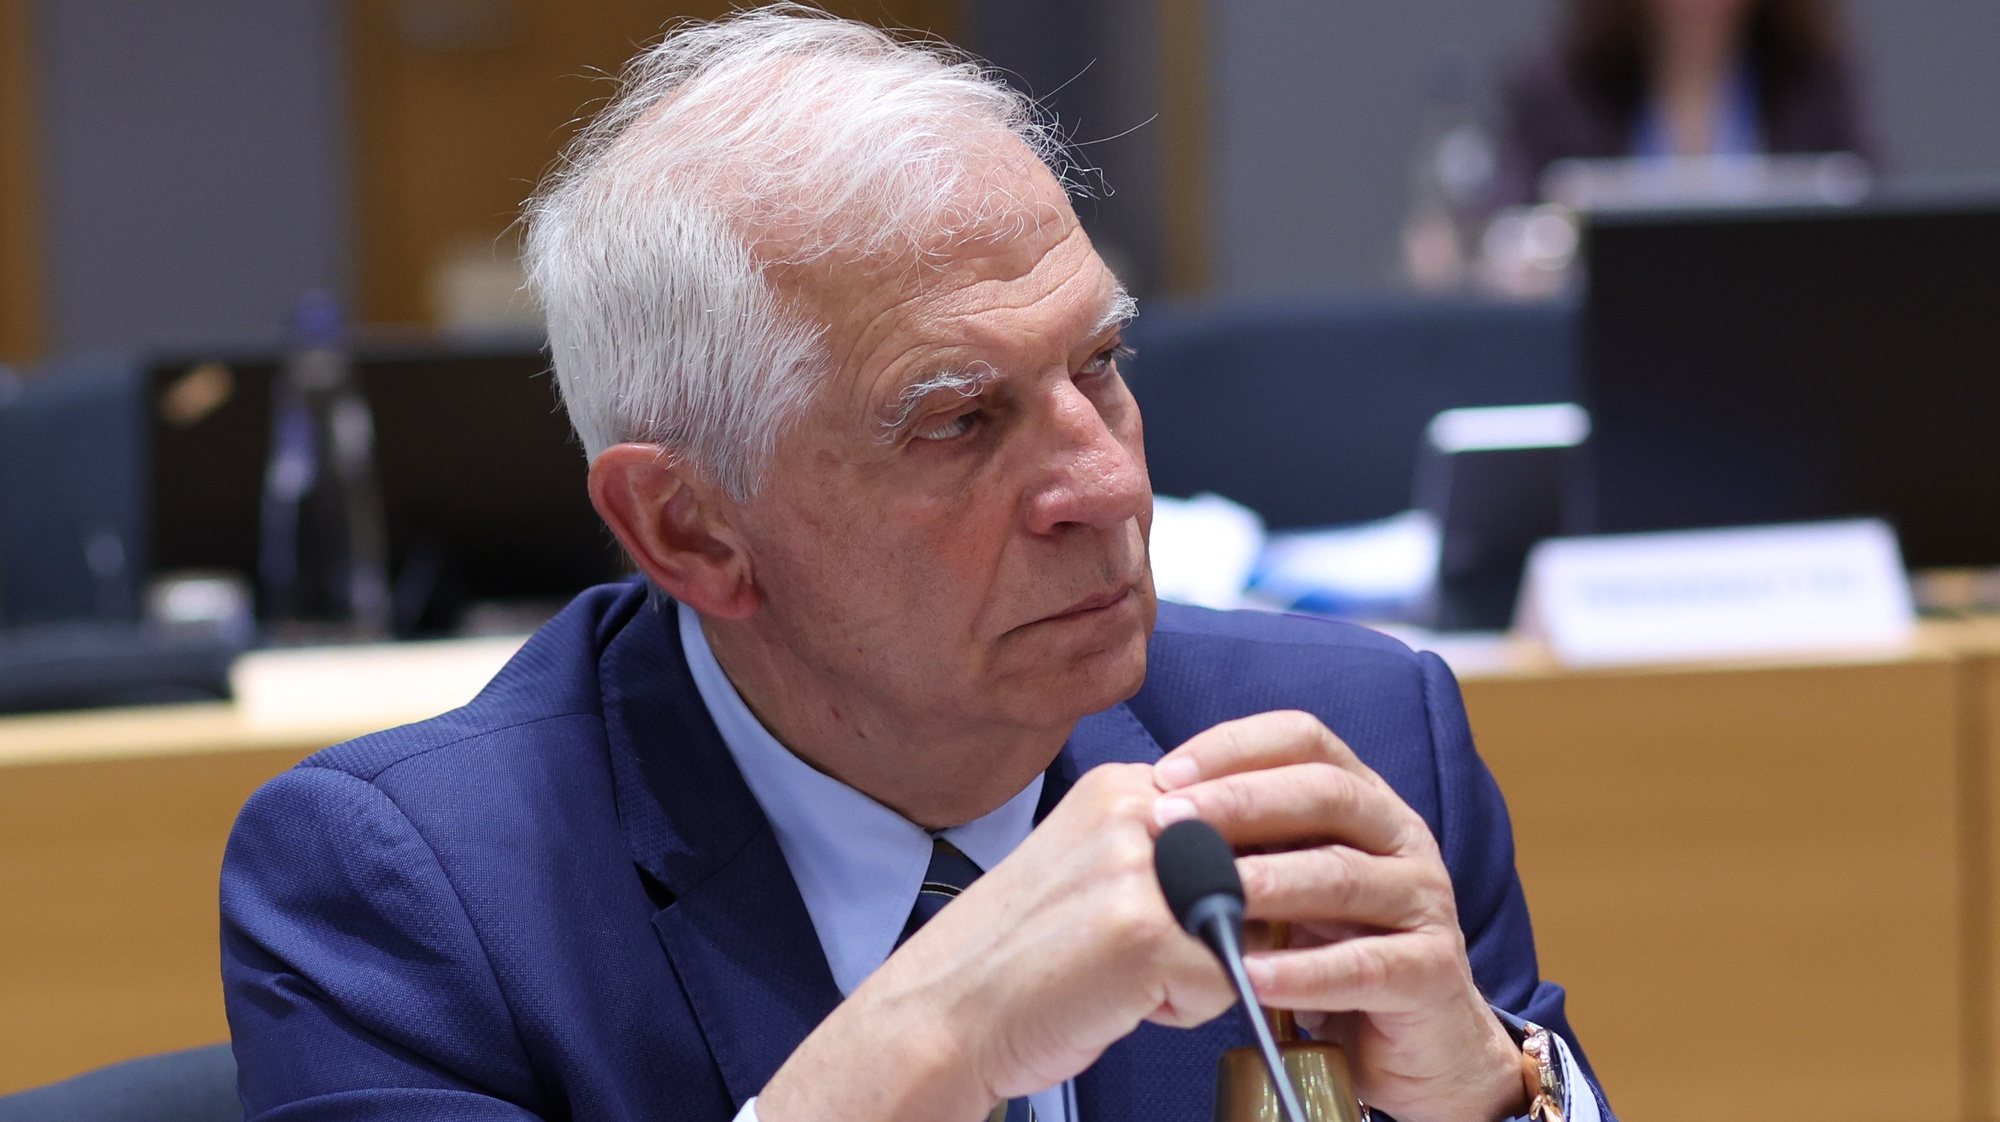 epa10645314 European Union for Foreign Affairs and Security Policy Josep Borrell during European Foreign ministers council meeting in Brussels, Belgium, 22 May 2023. EU Foreign Affairs Ministers will discuss the Russian aggression against Ukraine and the Horn of Africa.  EPA/OLIVIER HOSLET